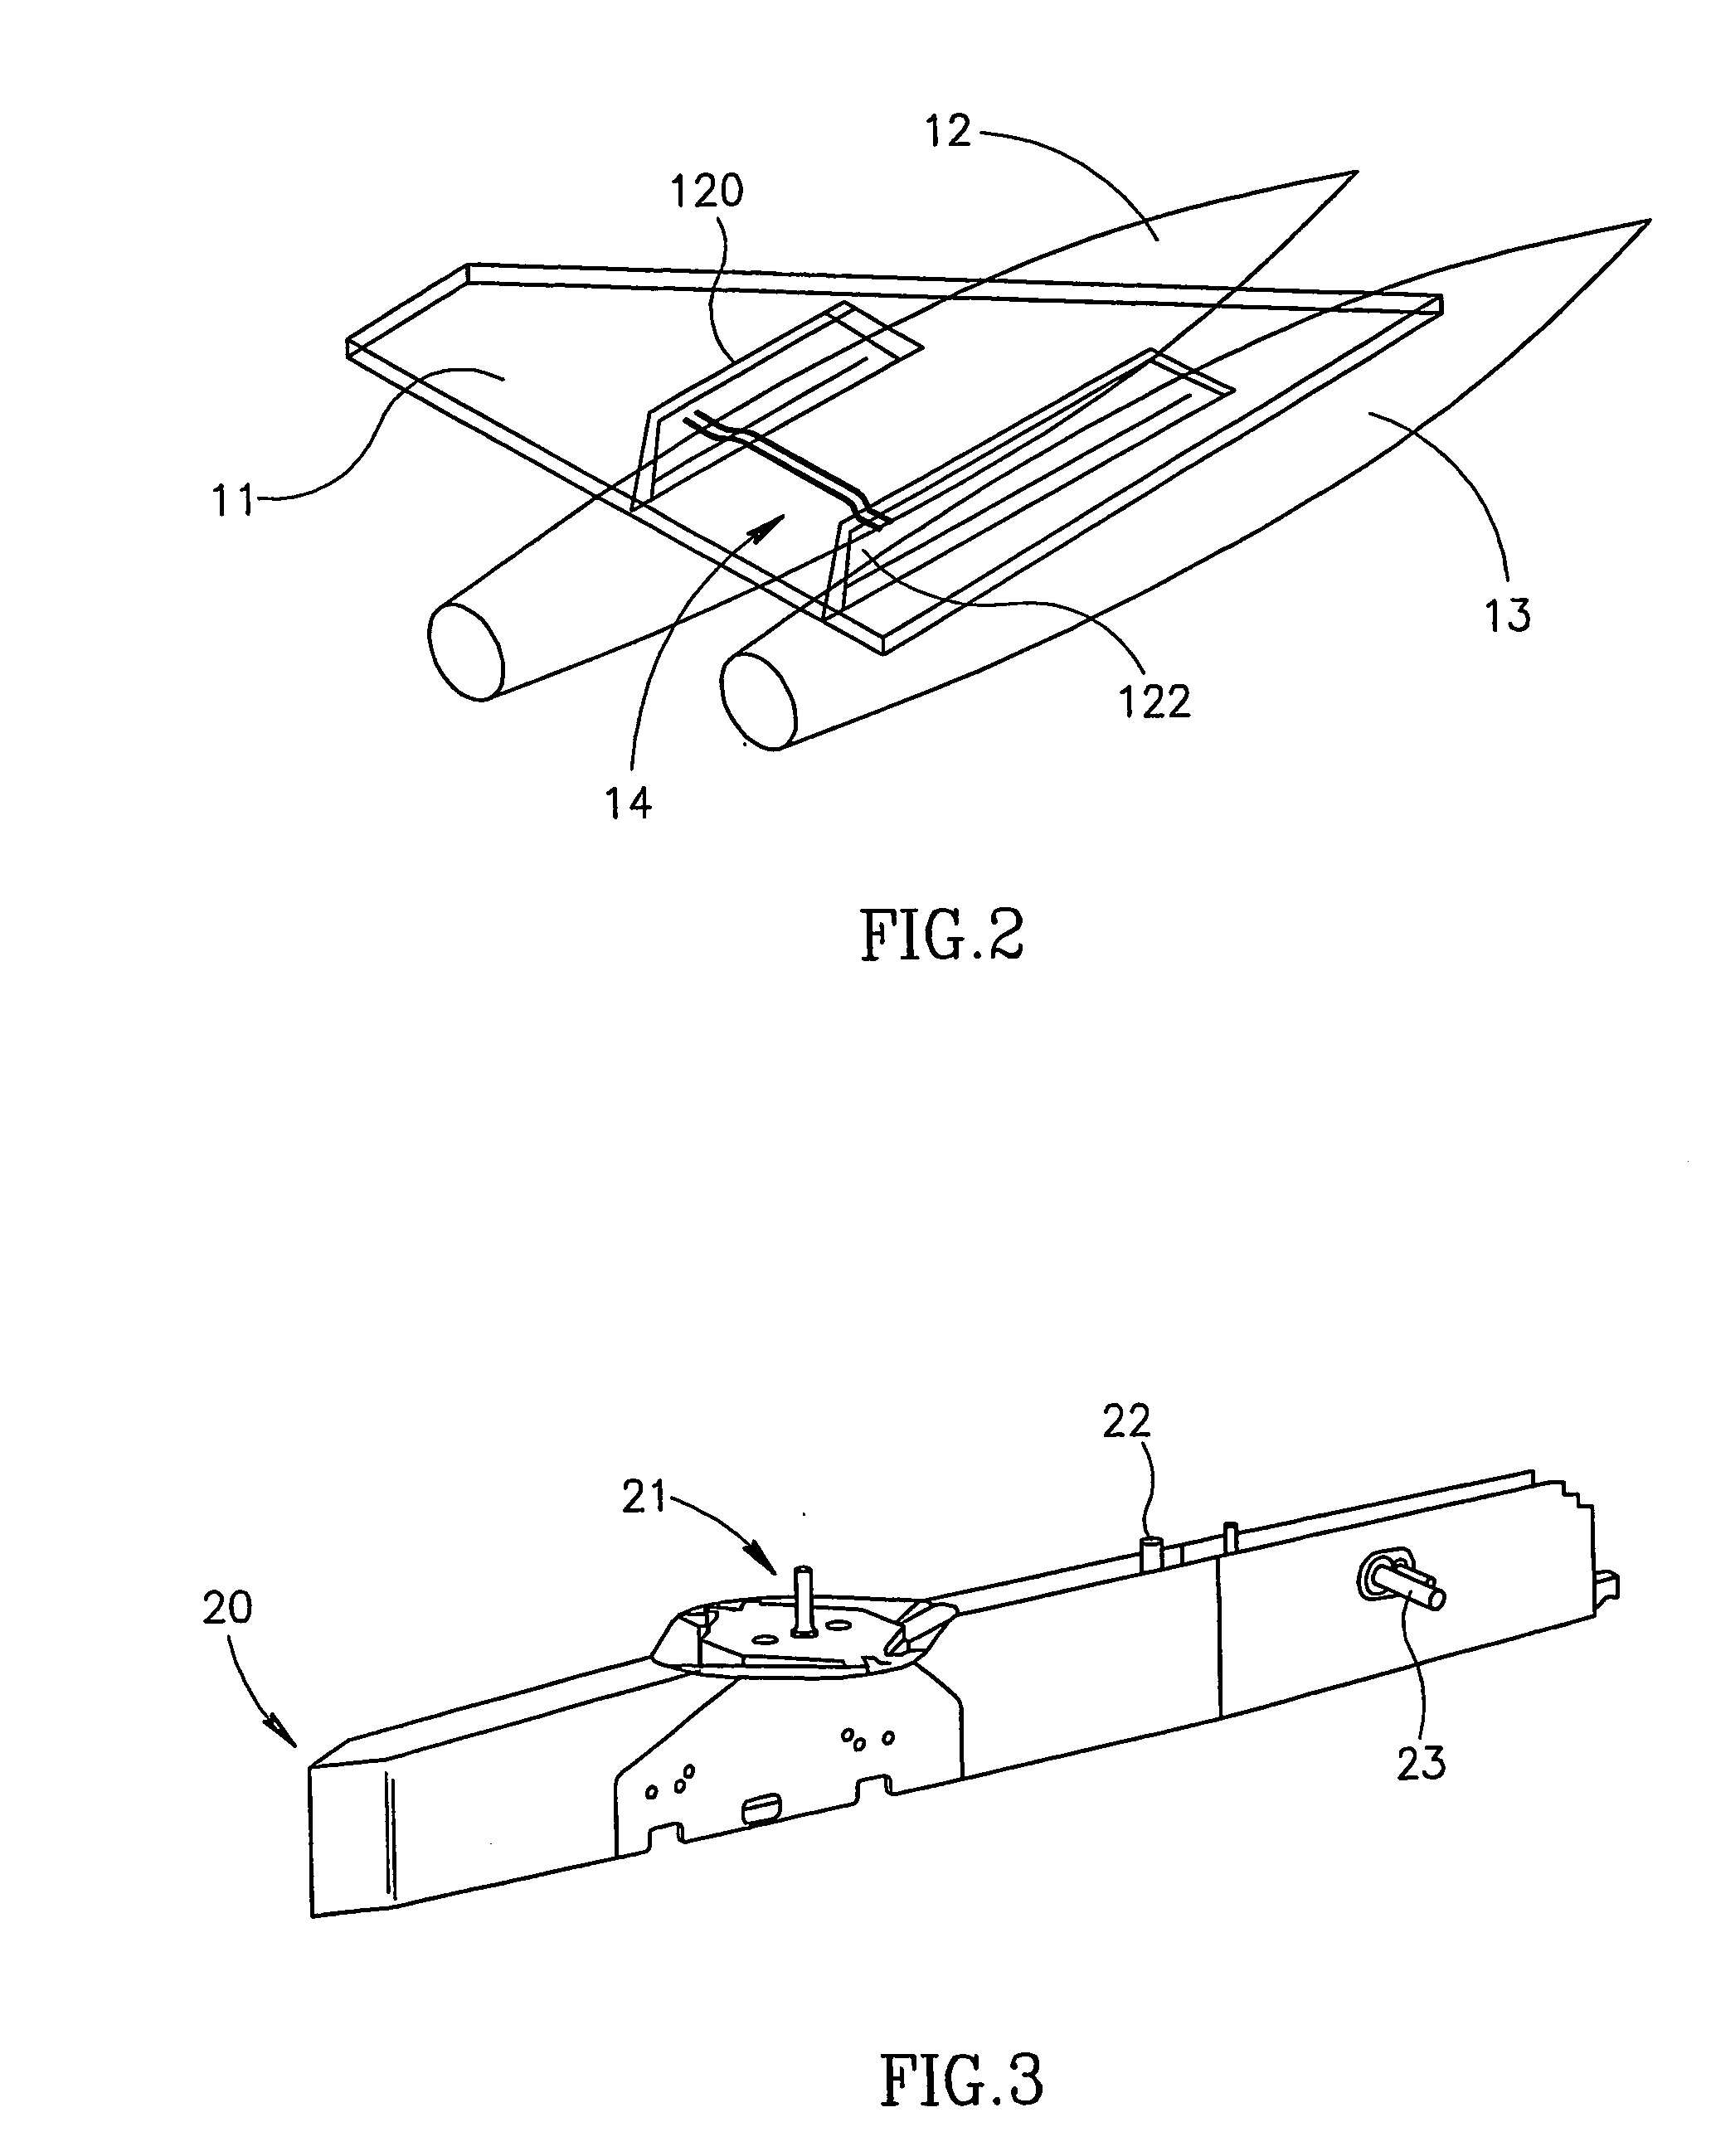 System and method for enhancing the fuel storage volume and the fuel carriage capacity of external fuel stores carried by an aerial vehicle